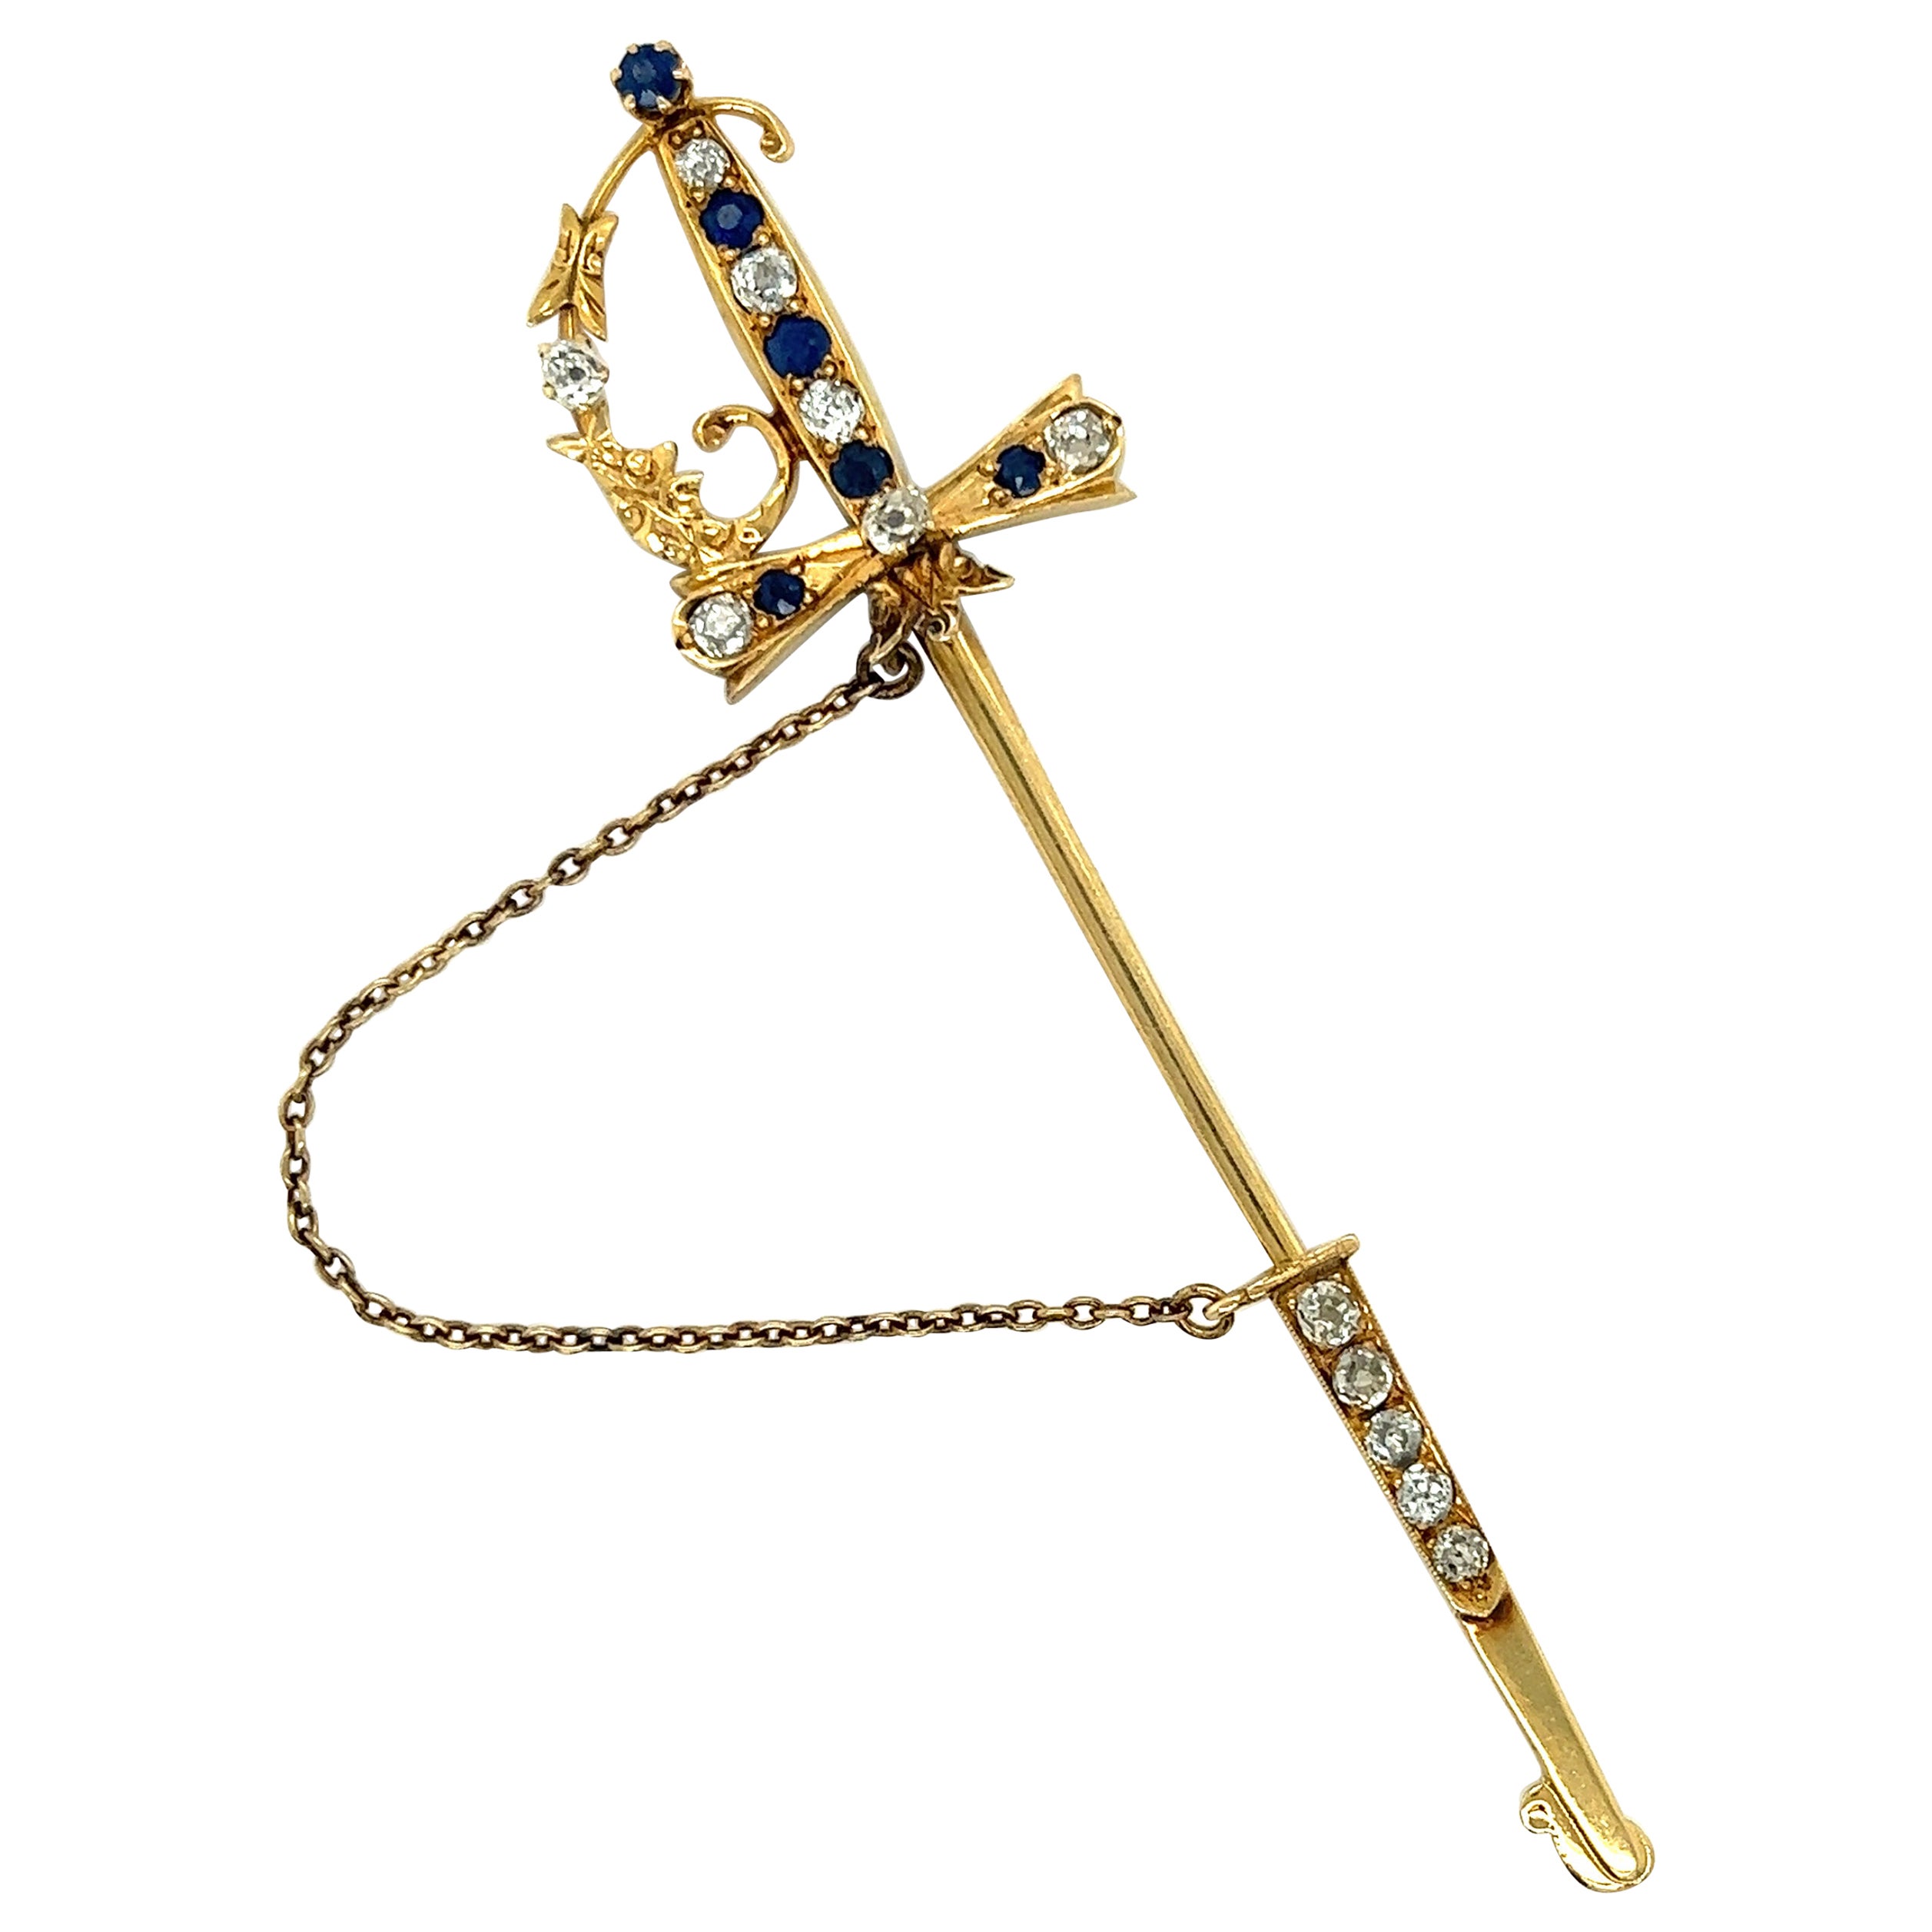 Fantastic display of craftsmanship seen on this stand out sword jabot pin. The pin is crafted in 14k yellow gold and is American made. The jabot pin was crafted in approximately the 1850's and for being well over 150 years old it is in great pre